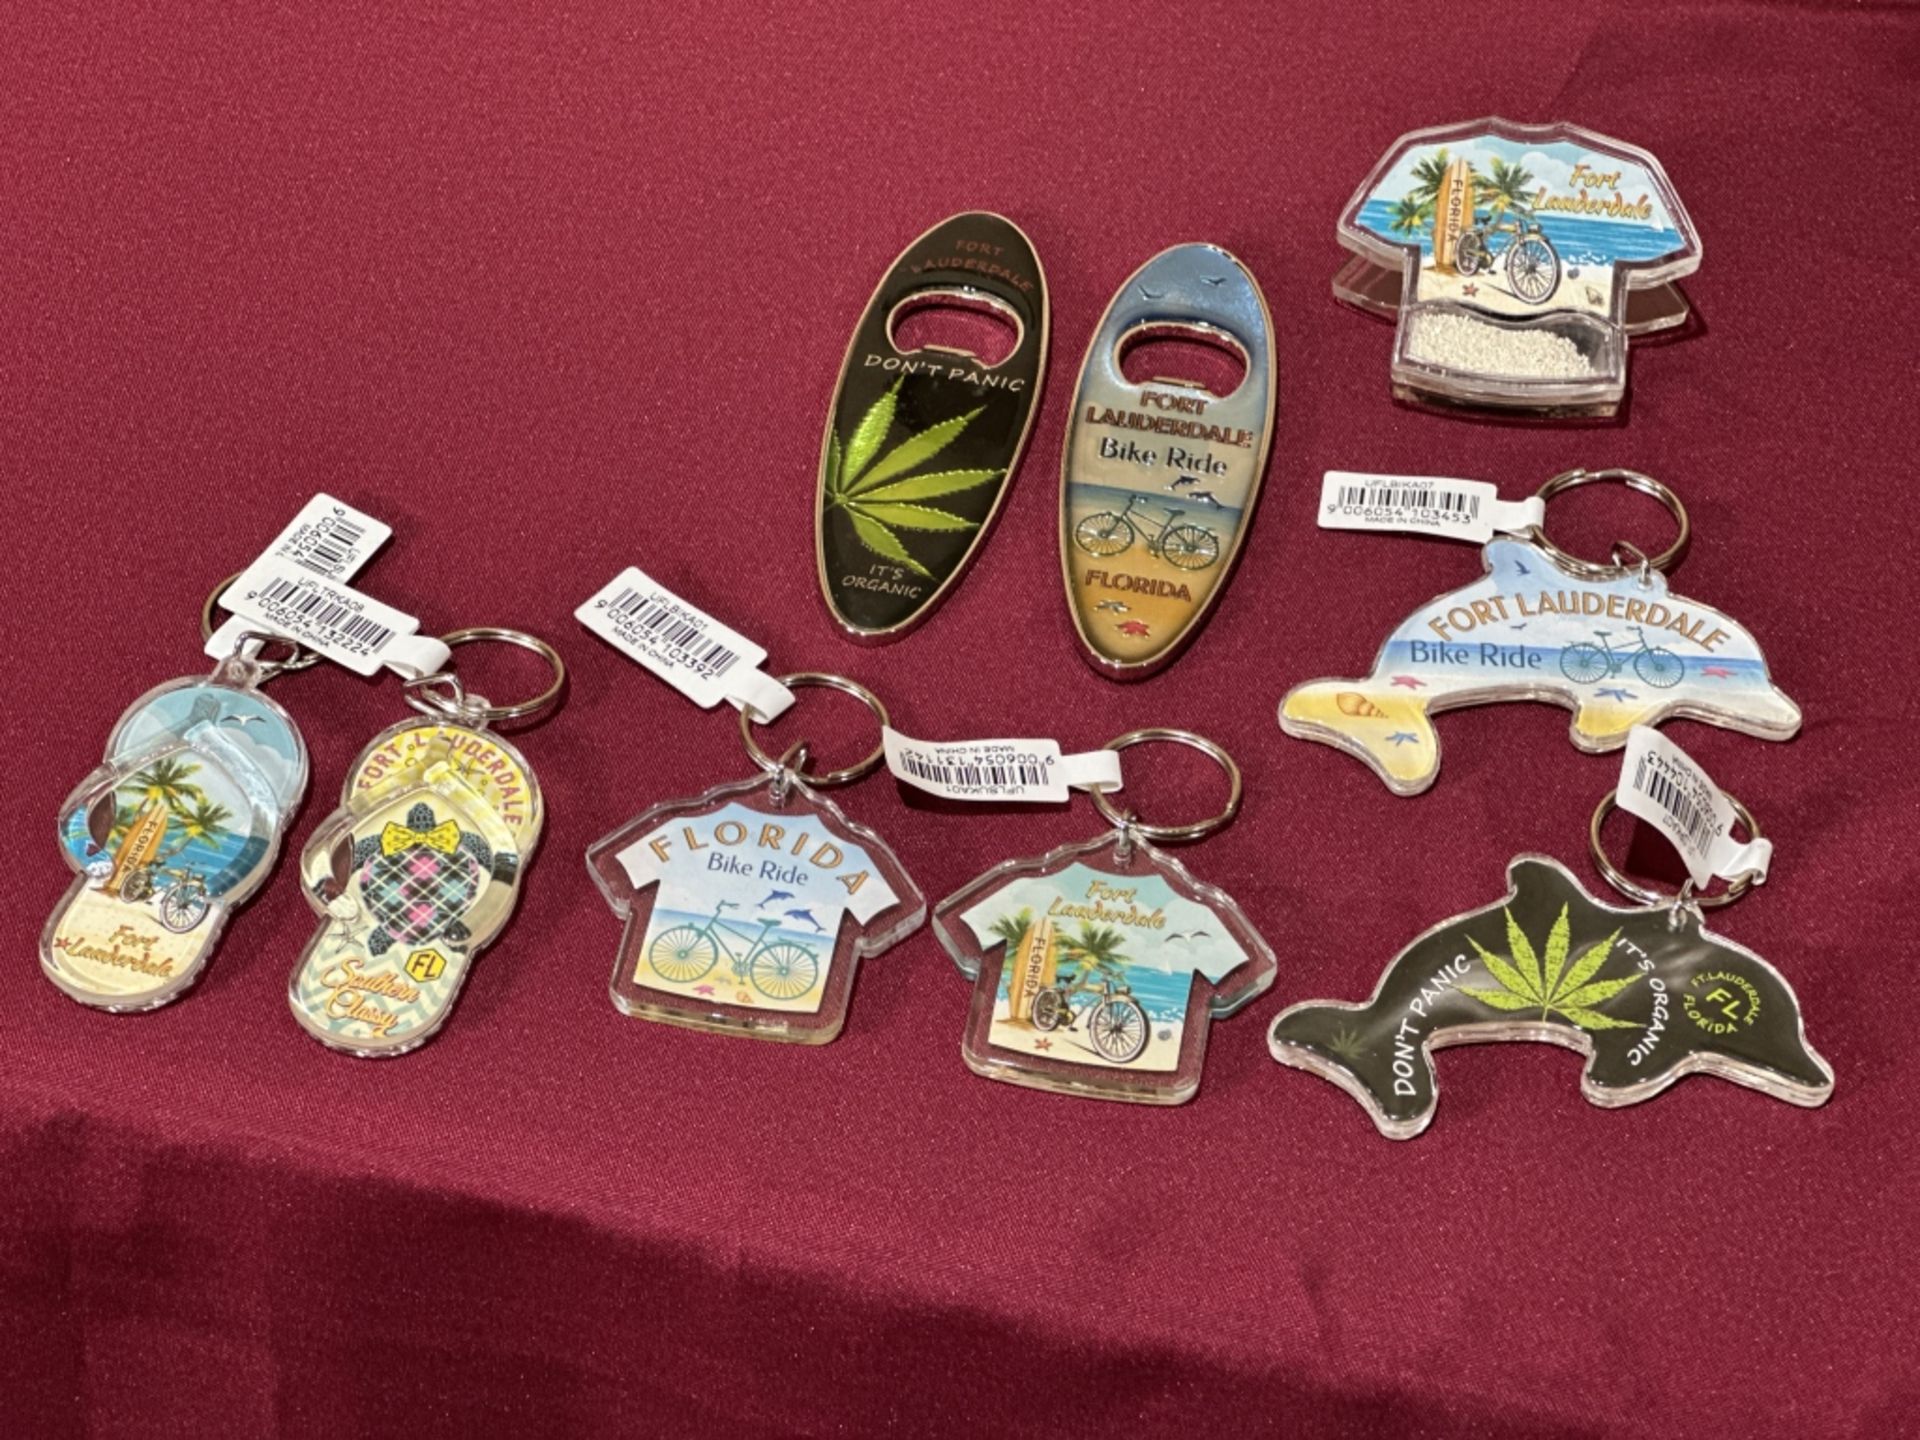 LOT CONSISTING OF ASSORTED BEACH-THEMED SOUVENIRS - Image 2 of 9